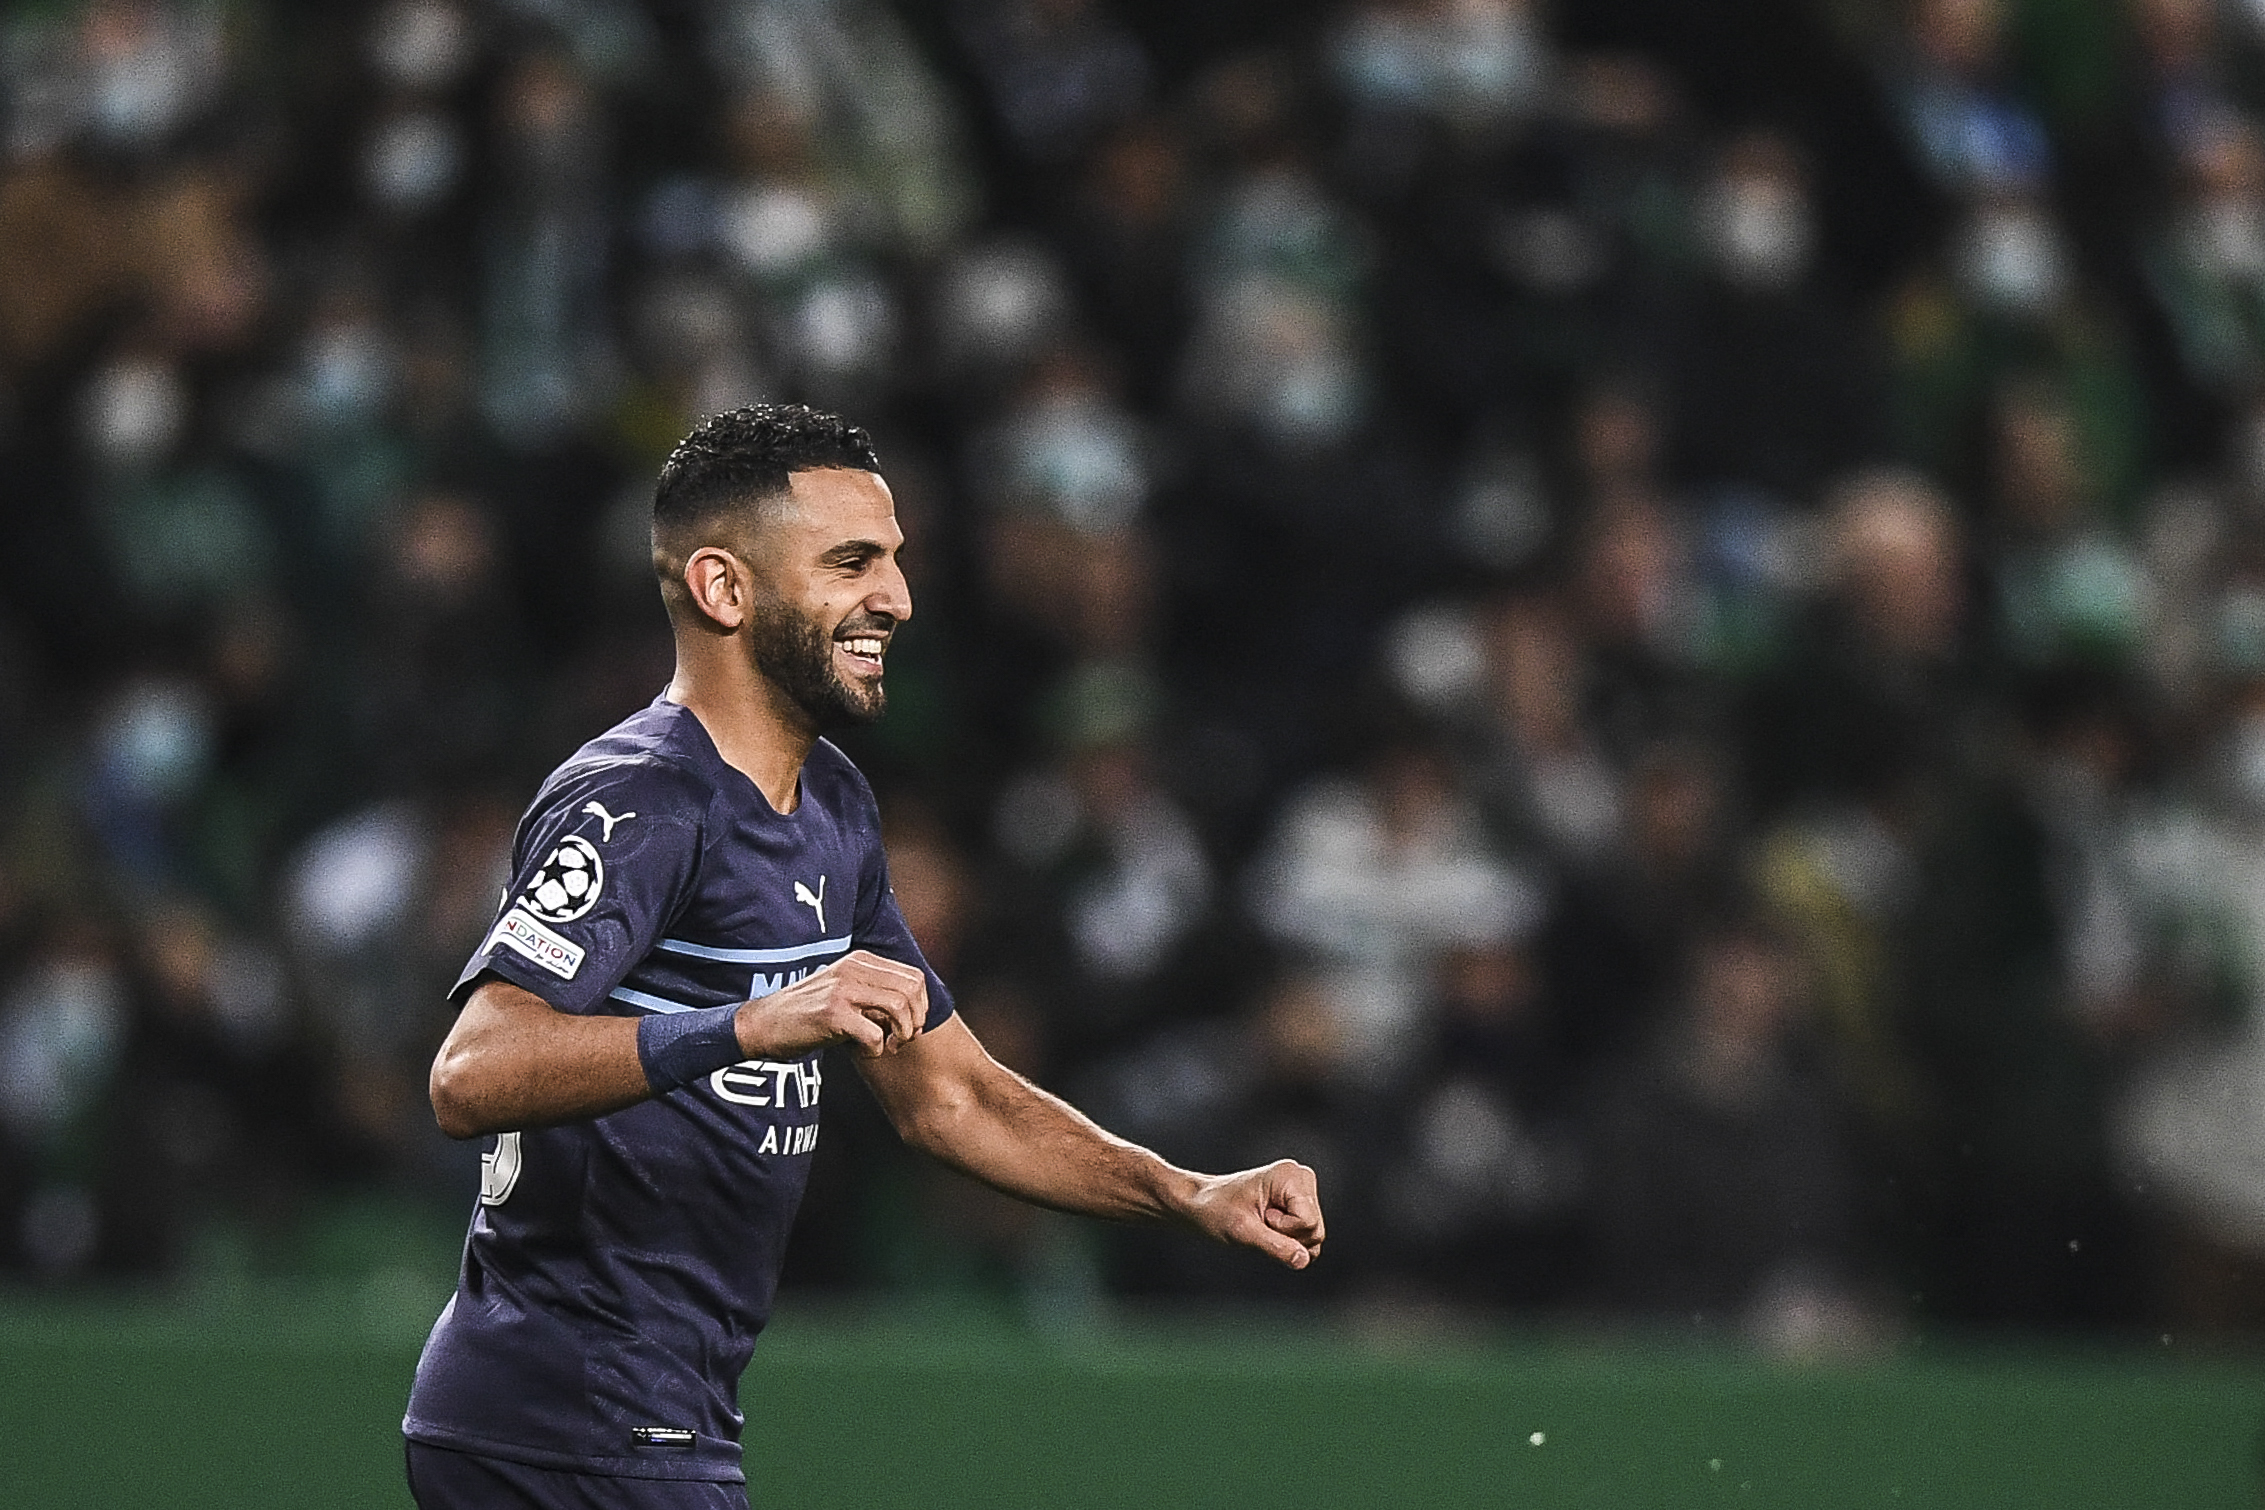 Riyad Mahrez's future at Man City is surrounded by uncertainty. (Photo by PATRICIA DE MELO MOREIRA/AFP via Getty Images)